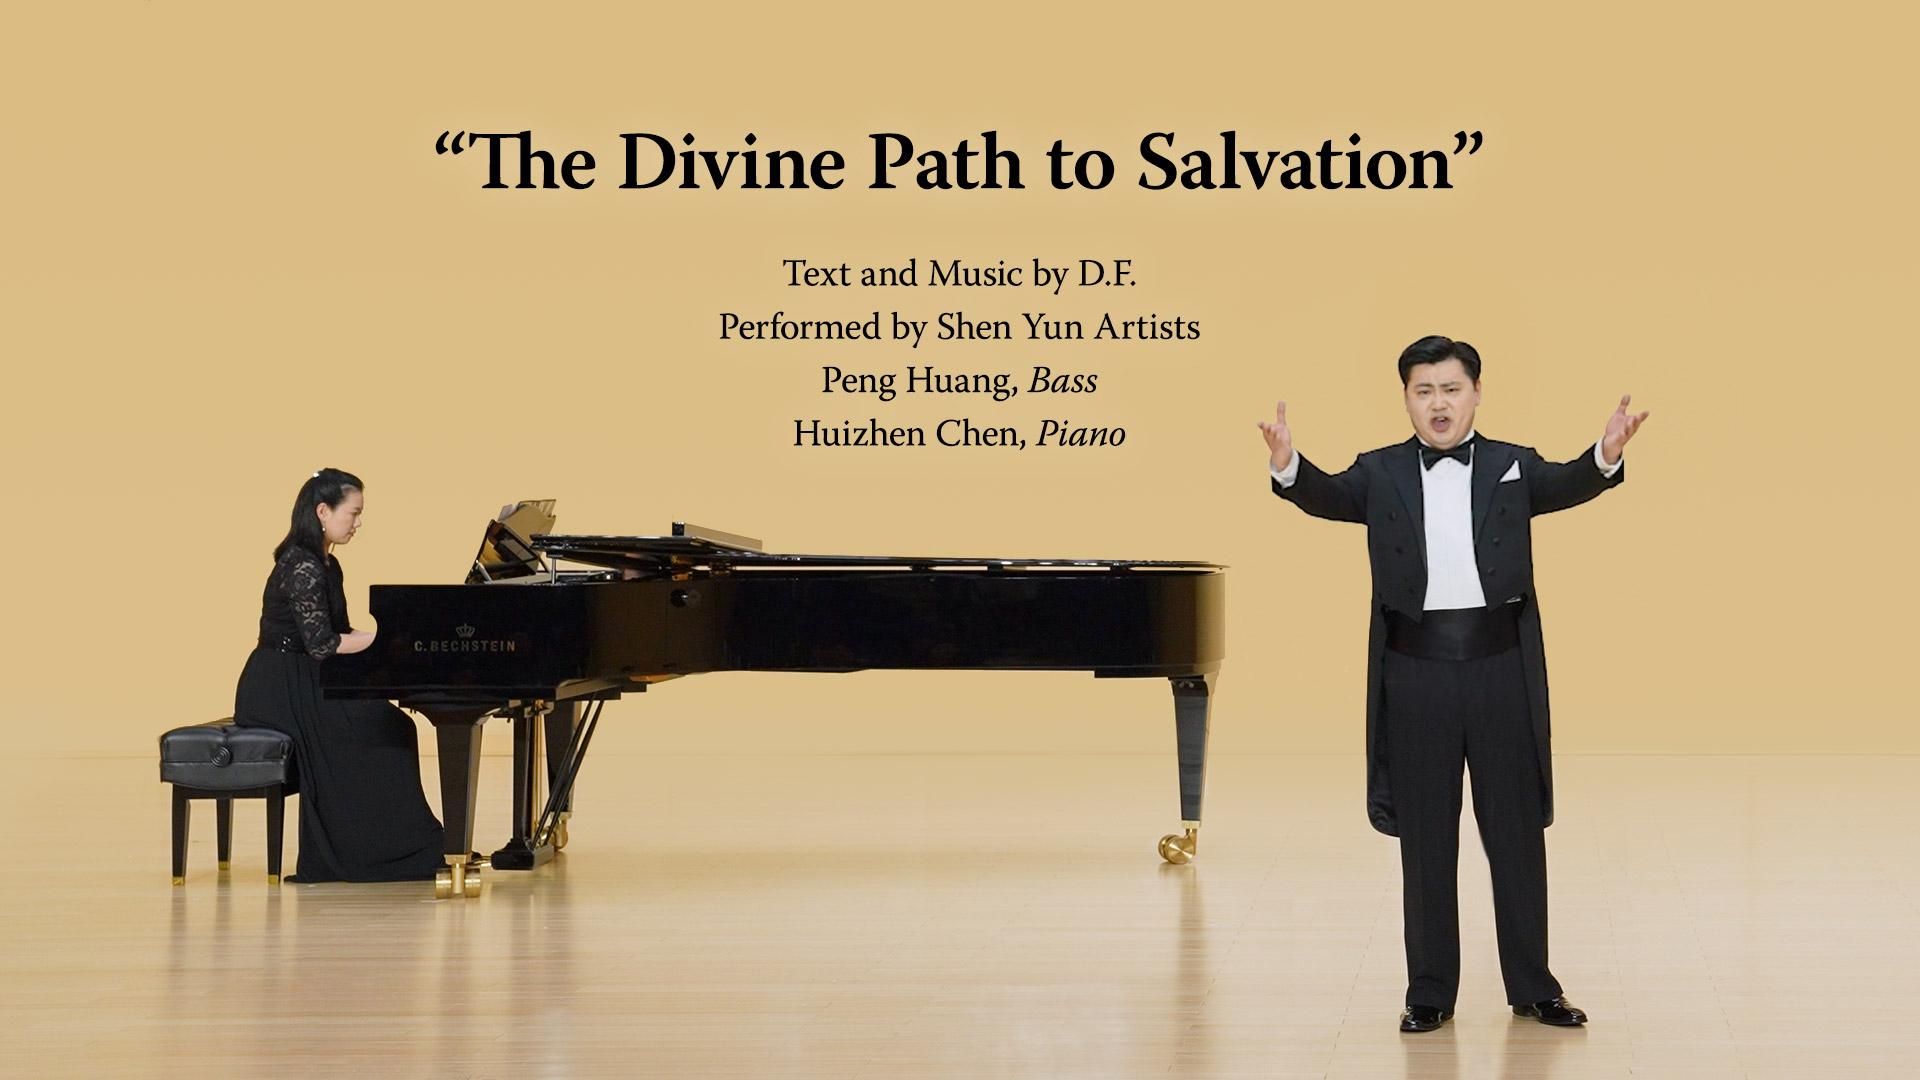 The Divine Path to Salvation